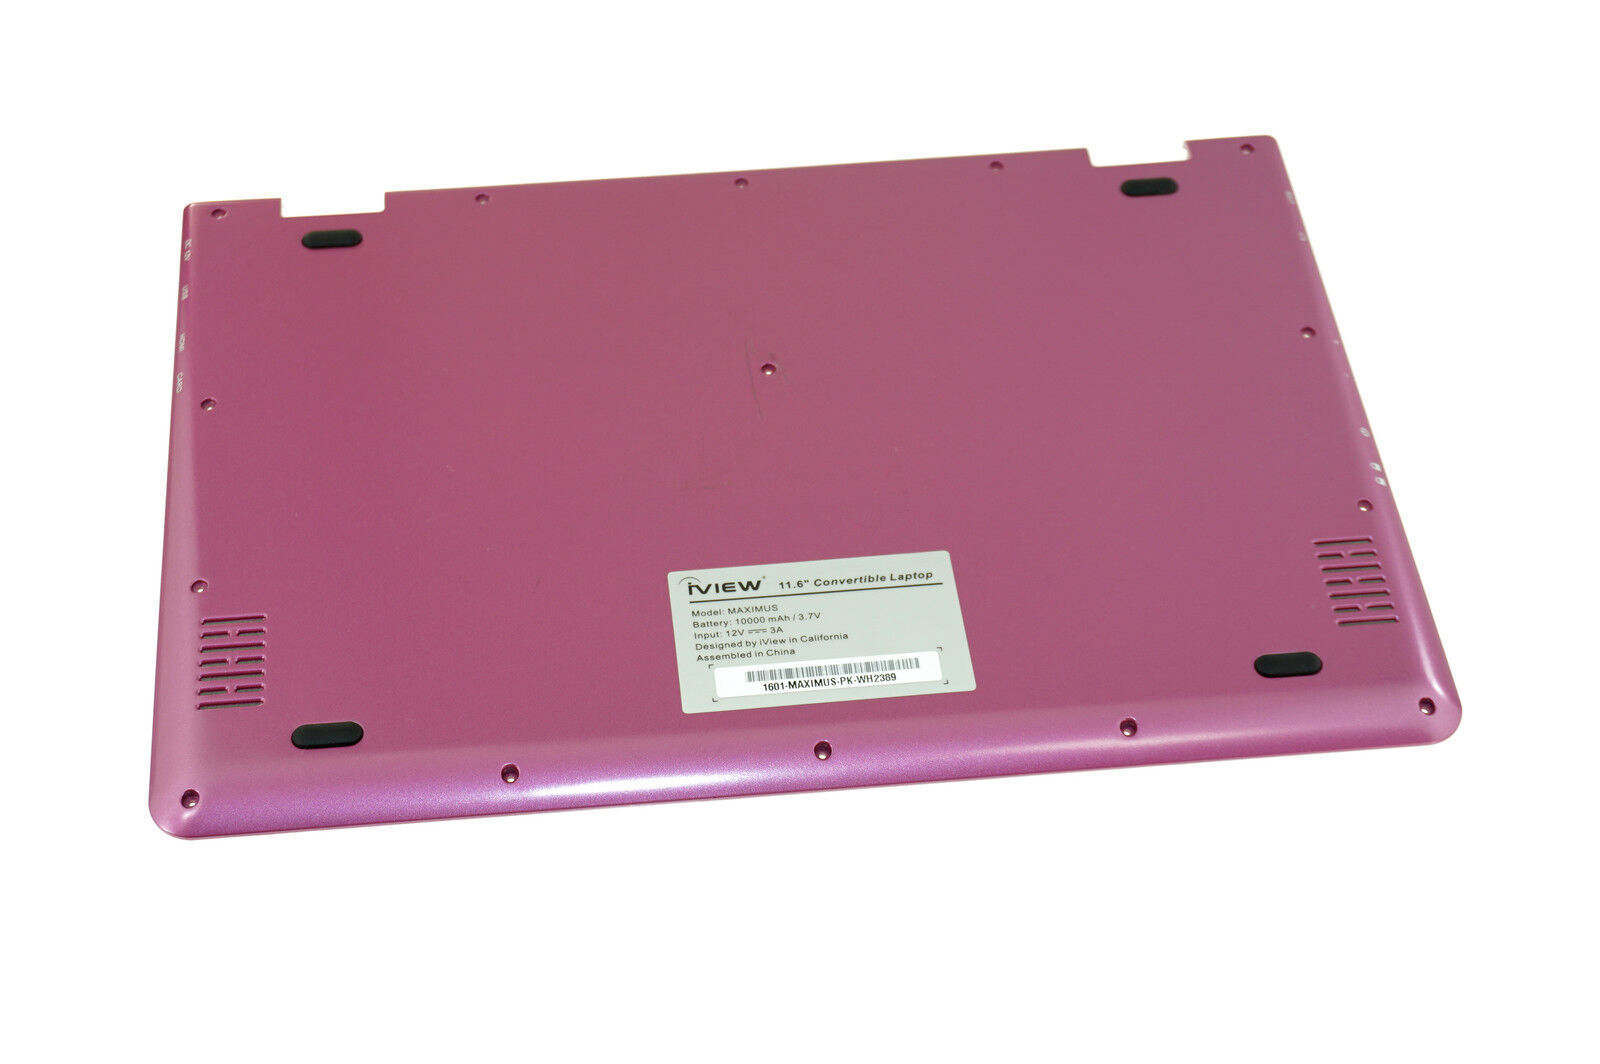 1601-MAXIMUS-PK-WH2389 GENUINE  IVIEW BASE COVER PINK MAXIMUS (GRD B) (AC76)